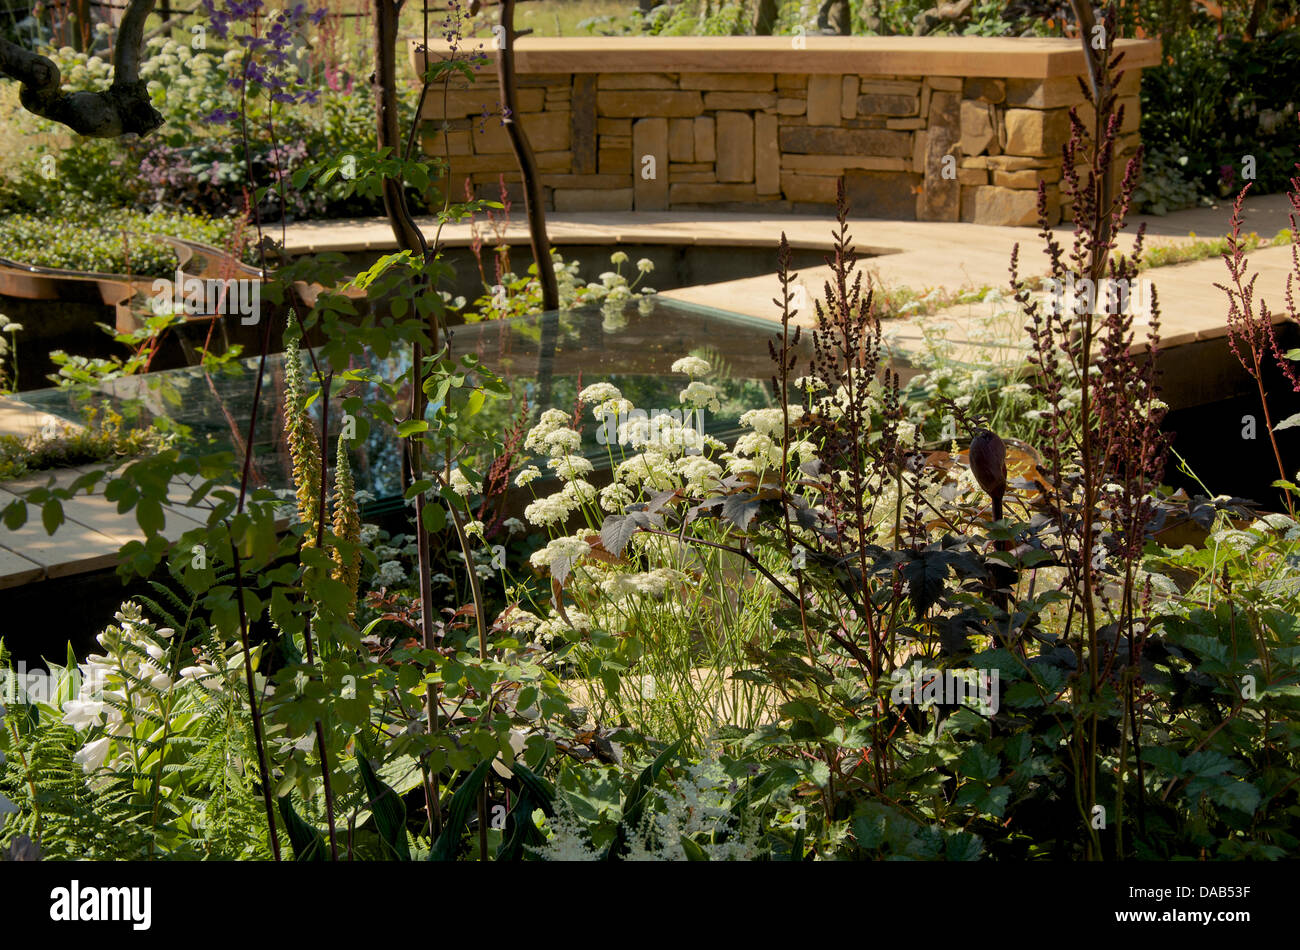 Hampton Court, UK. 8th July 2013. A Cool Garden at RHS Hampton Court Palace Flower Show 2013 on Press Day, Monday 8th July 2013 in London, UK. The Gold medal winning garden designed by Ruth Marshall was also awarded Best Summer Garden. Credit:  Miriam Heppell/Alamy Live News Stock Photo